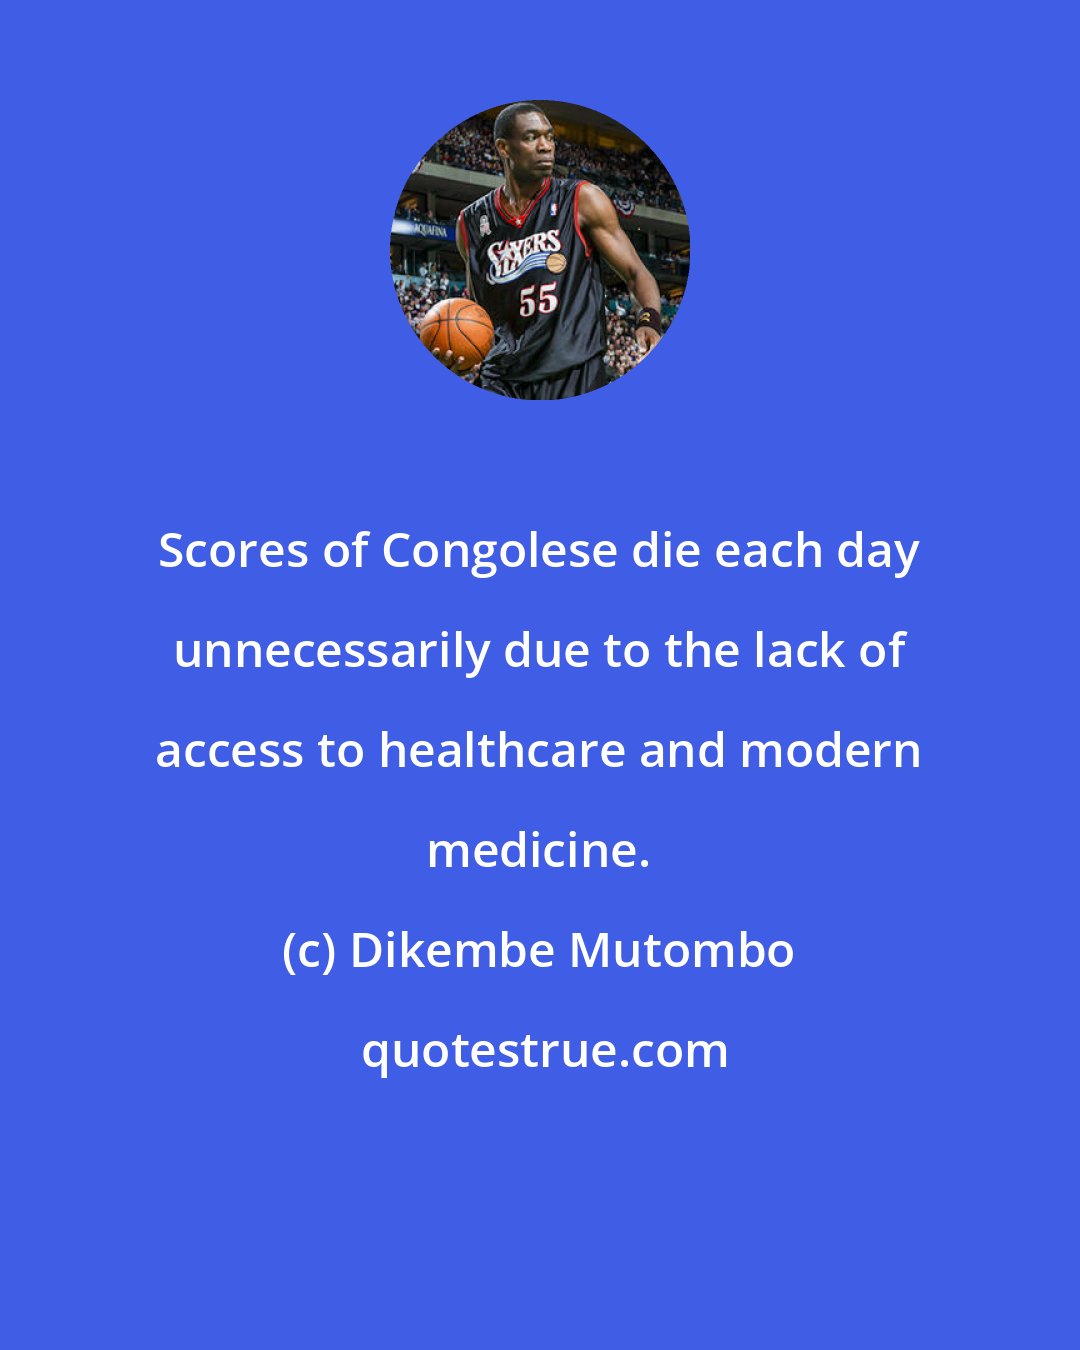 Dikembe Mutombo: Scores of Congolese die each day unnecessarily due to the lack of access to healthcare and modern medicine.